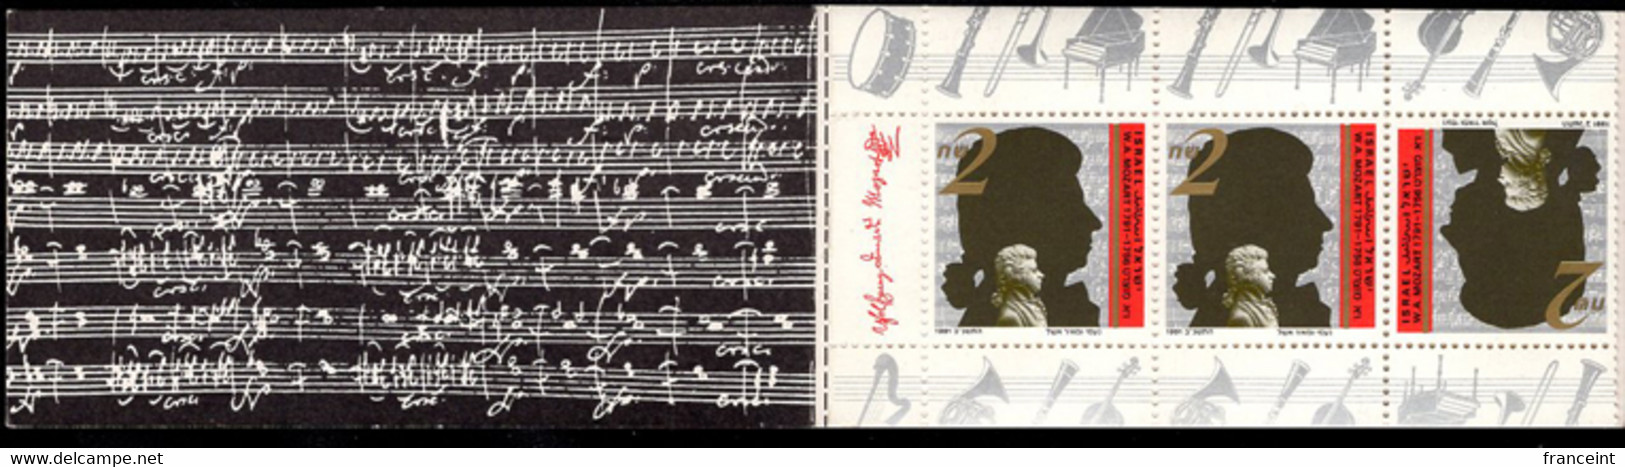 ISRAEL(1991) Mozart. Booklet Of 4 Stamps With Score From Don Giovanni On Inside Cover. - Carnets